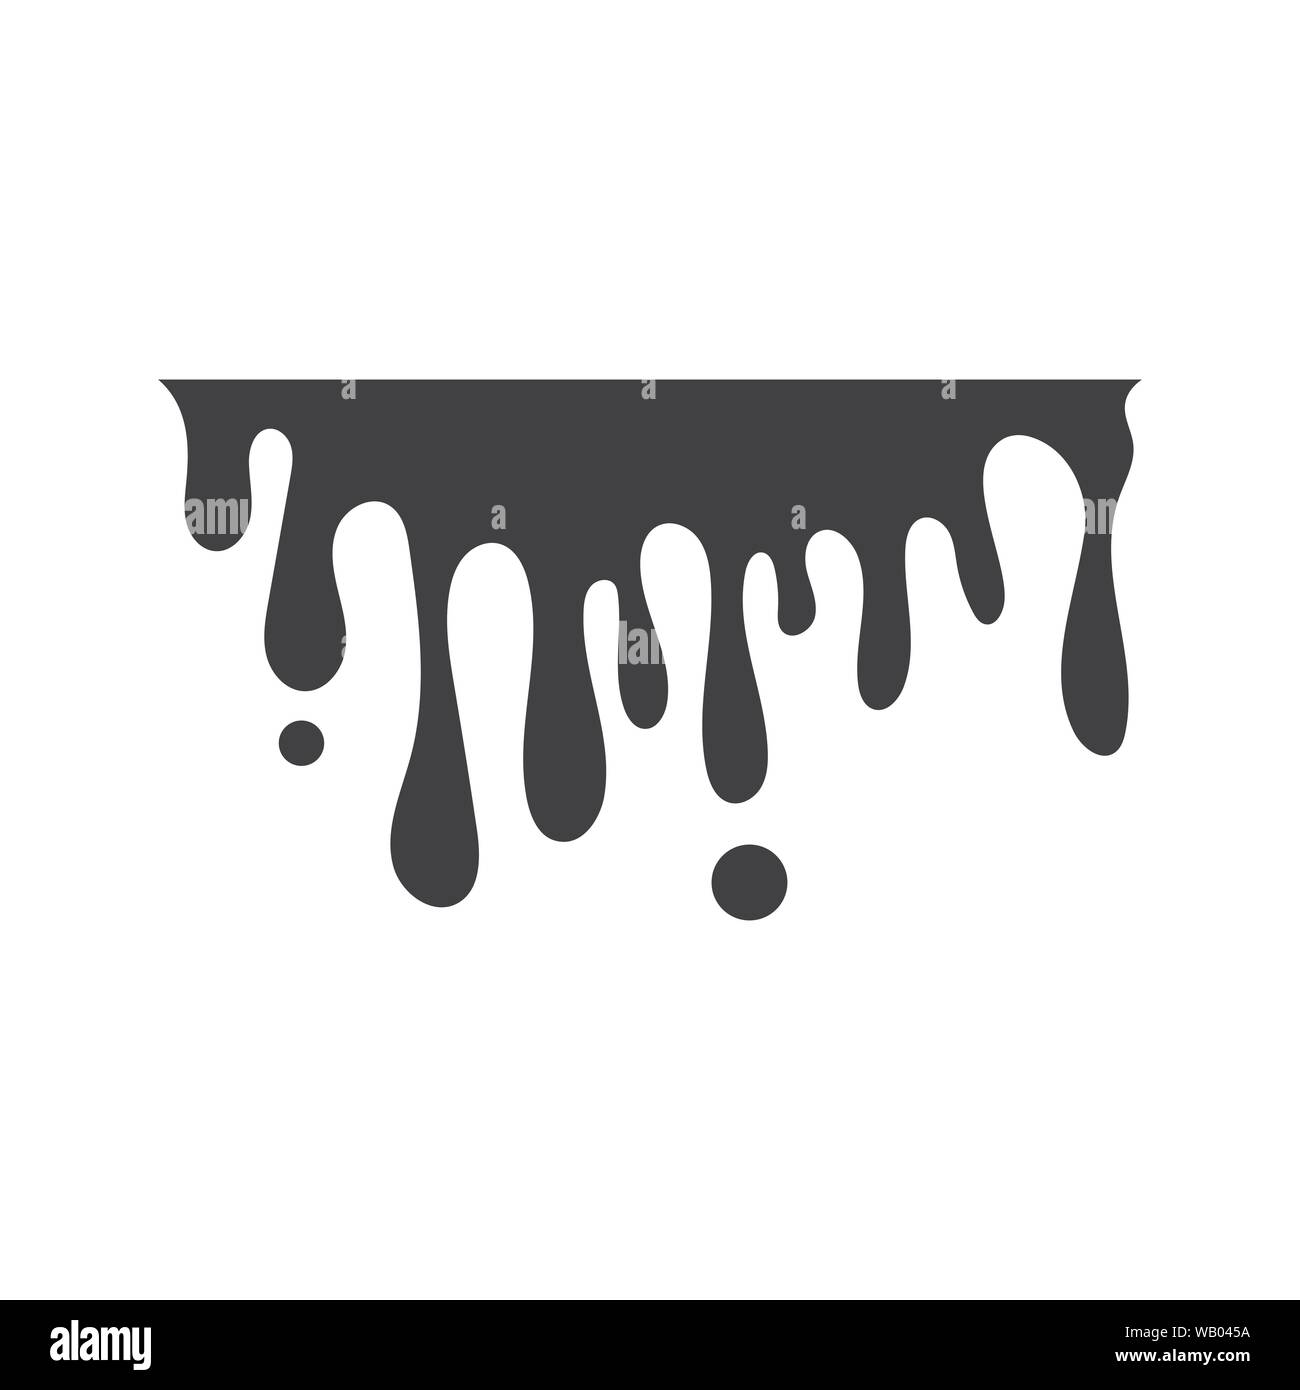 ink drop Vector icon design illustration template Stock Vector Image ...